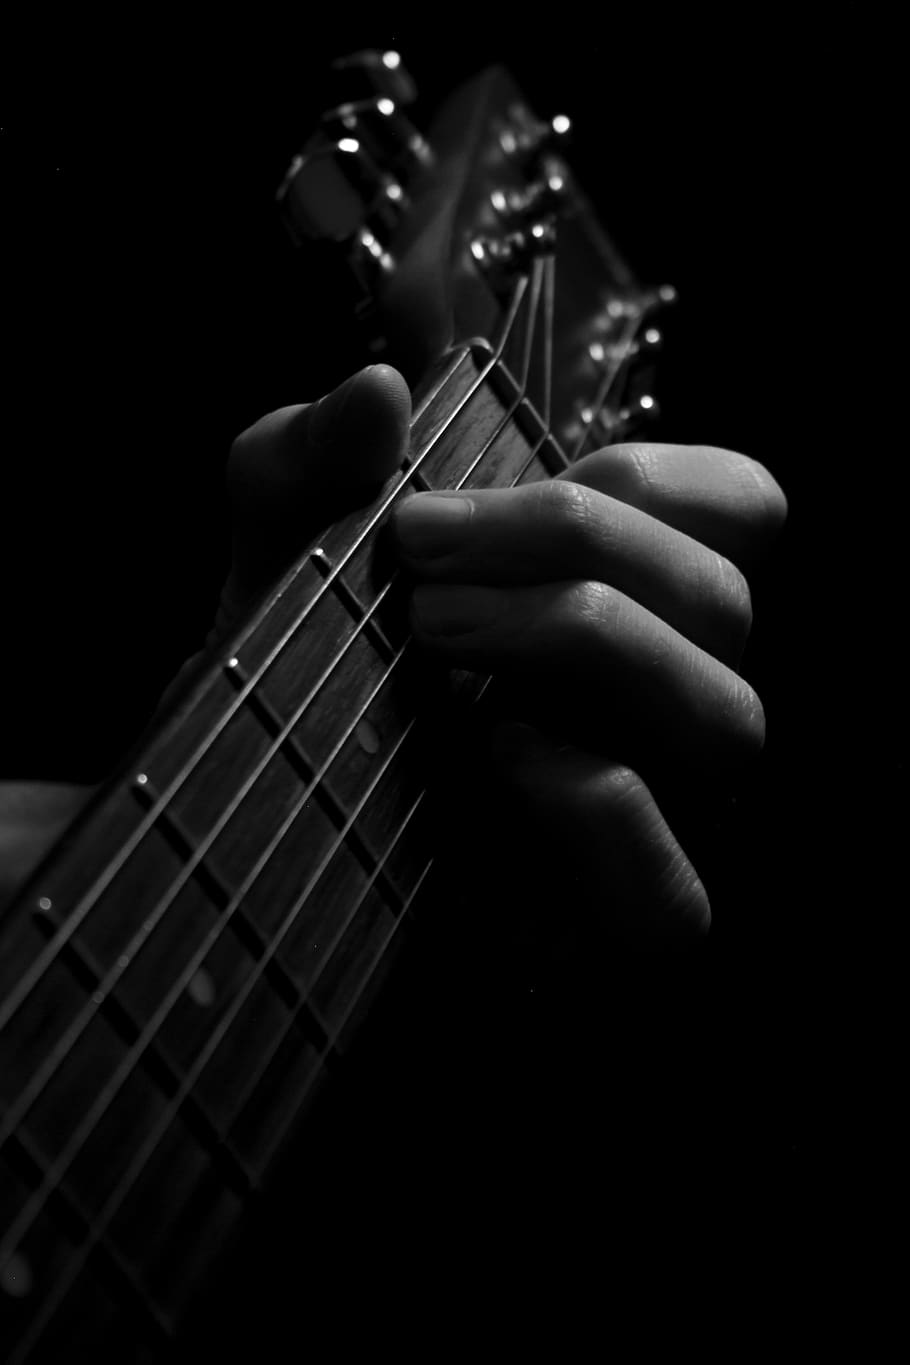 A person's hand playing a guitar in black and white. - Guitar